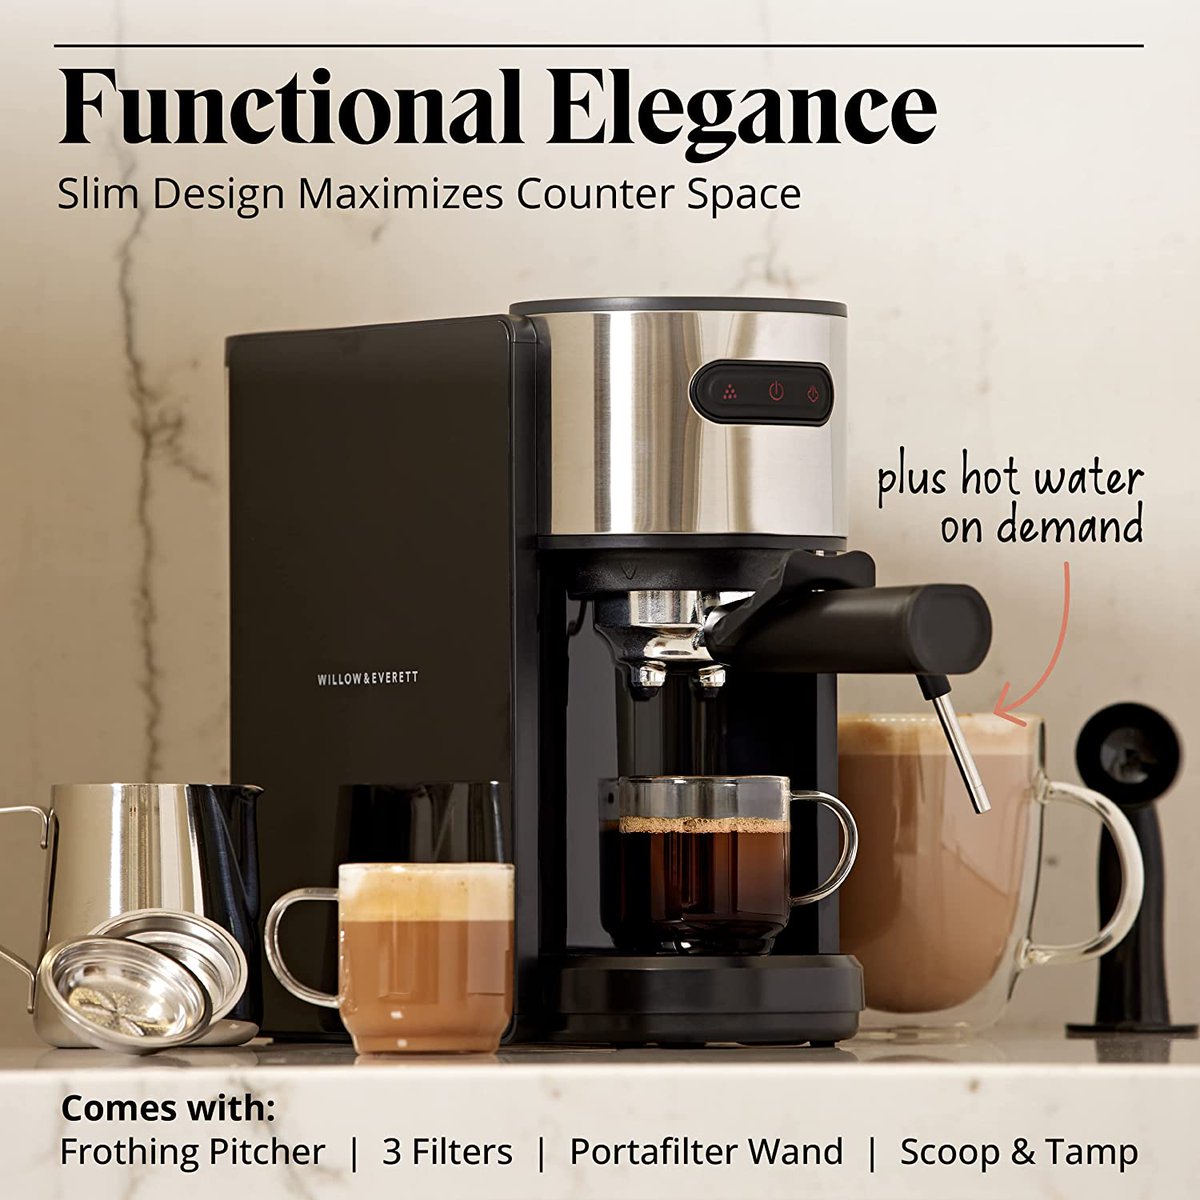 Lowest Price EVER!   
       
Compact Espresso Machine Bundle with built in Milk Frother/Steam Wand, PLUS Frothing Pitcher

Get it ALL for only $80!!!

*Coupon PLUS use promo code; 14FKDLATTE

https://t.co/aWbRX2TQPs https://t.co/Wm8kYIiqc0